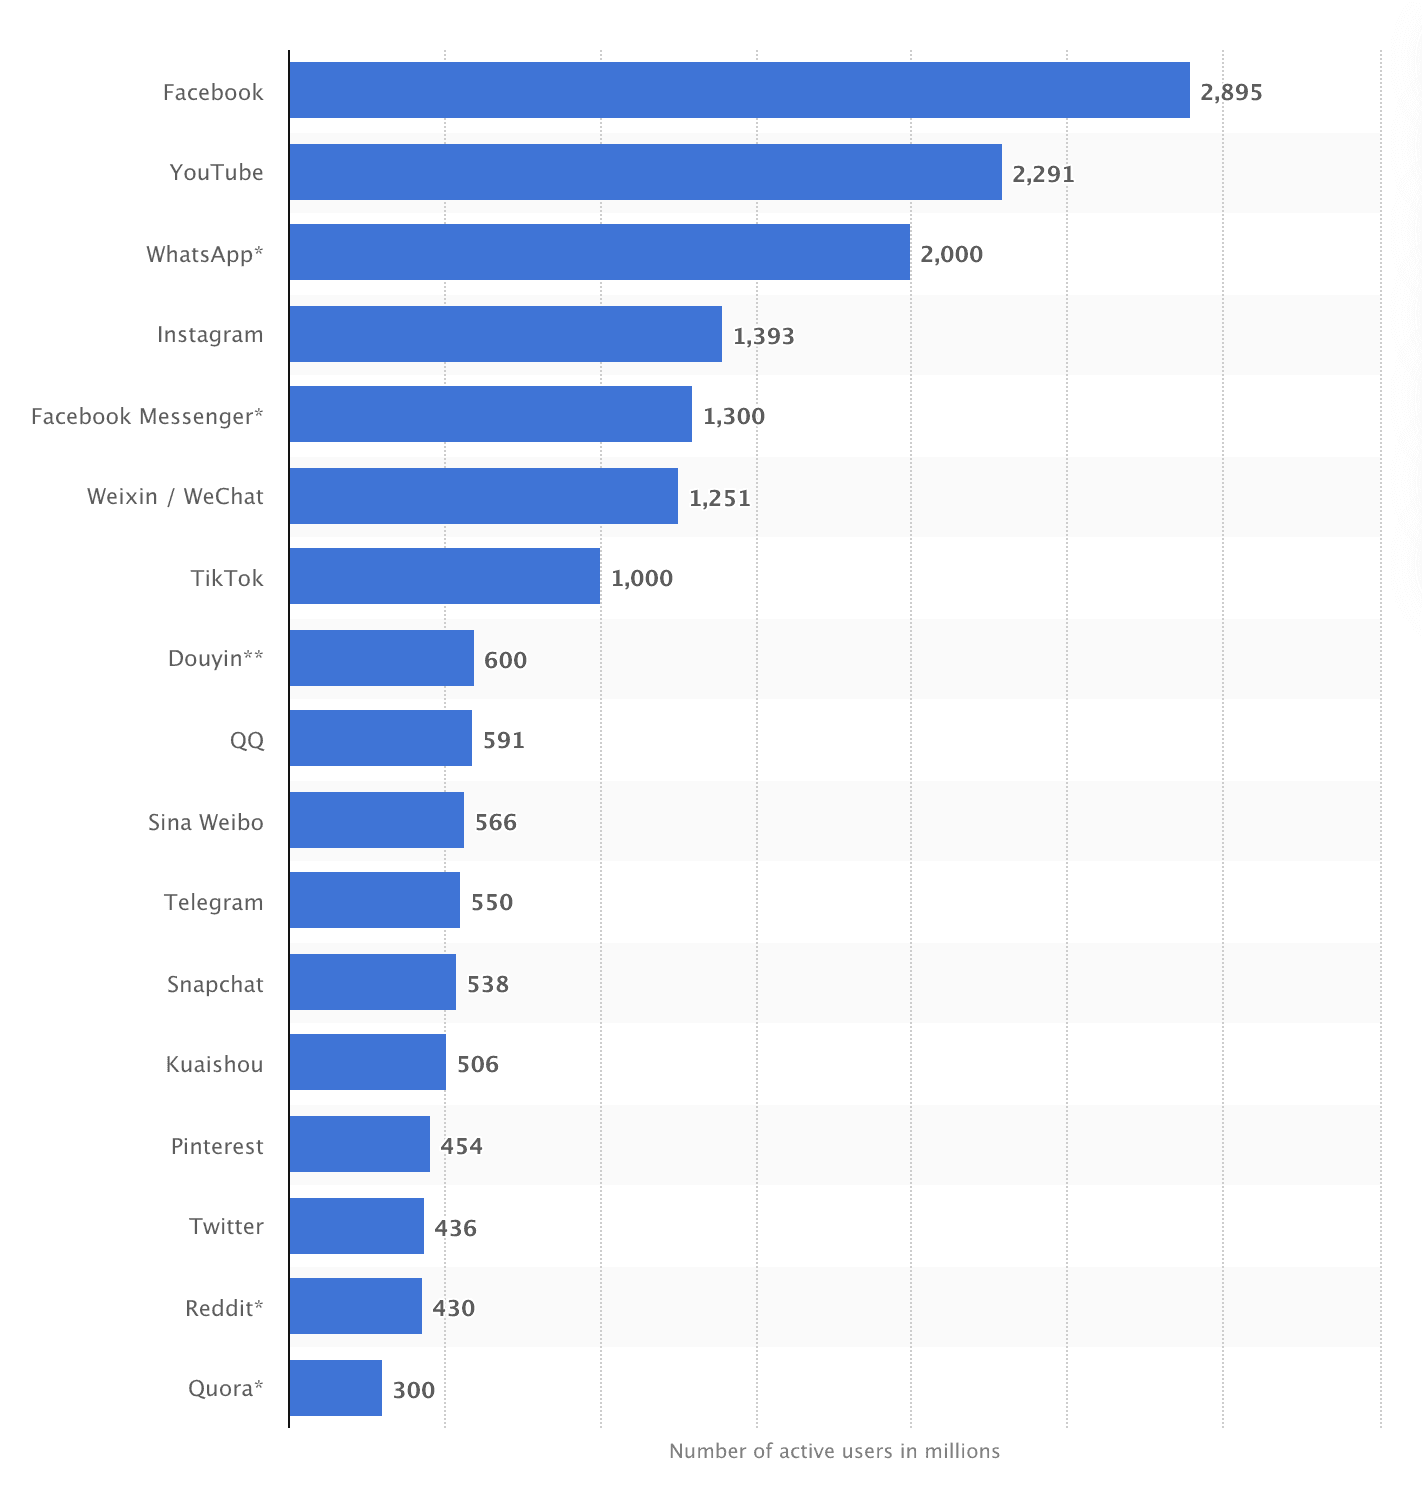 Graph from Statista ranking the top social media platforms based on the number of active users.